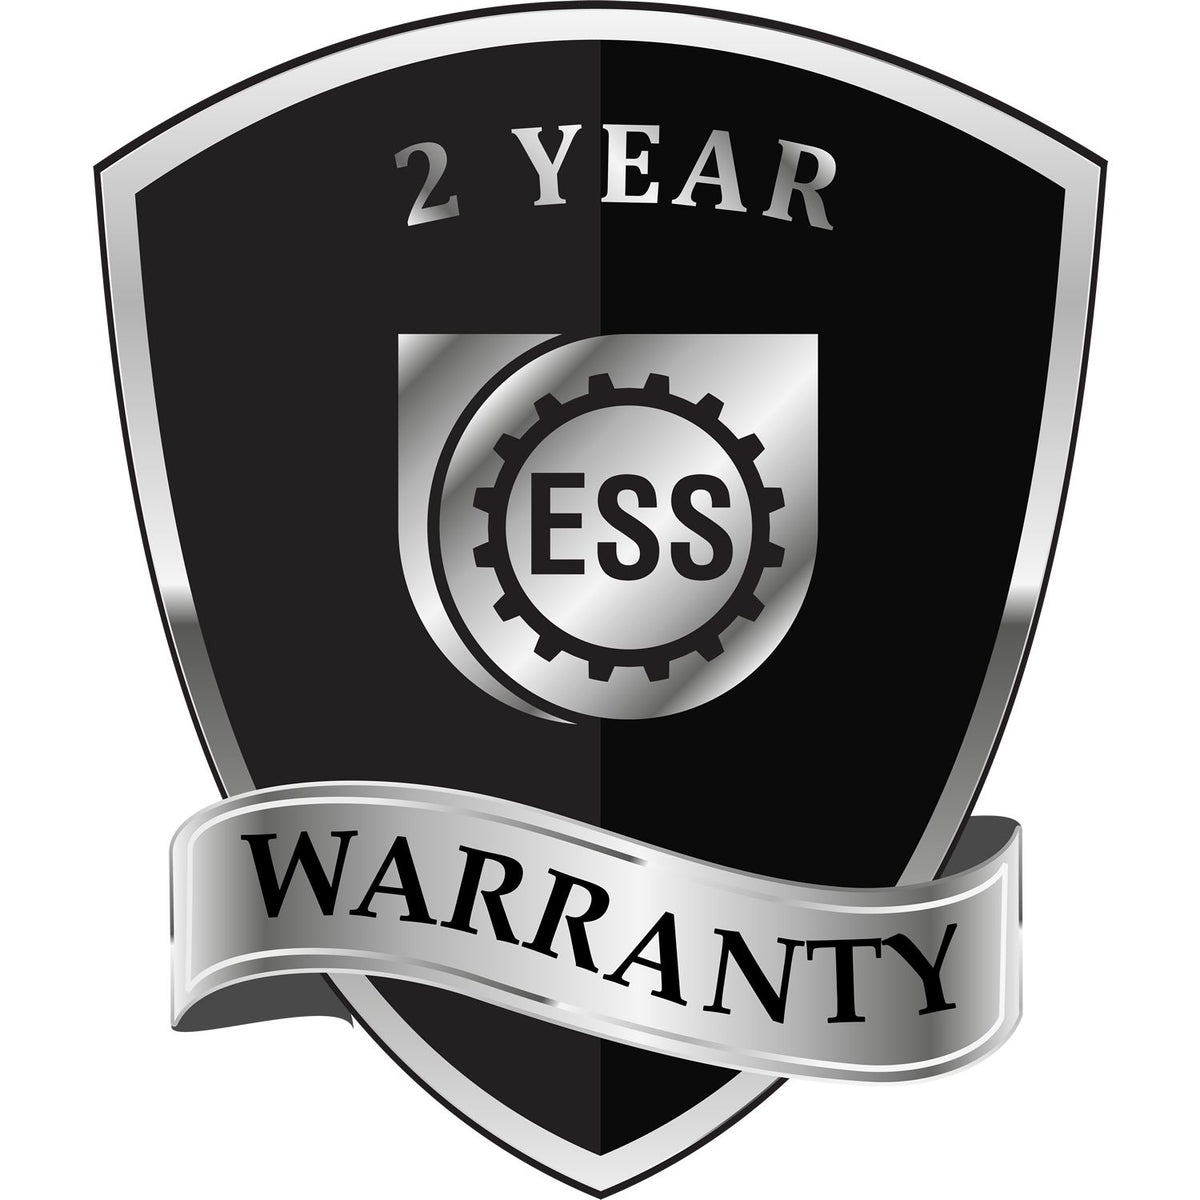 A badge or emblem showing a warranty icon for the Alabama Engineer Desk Seal